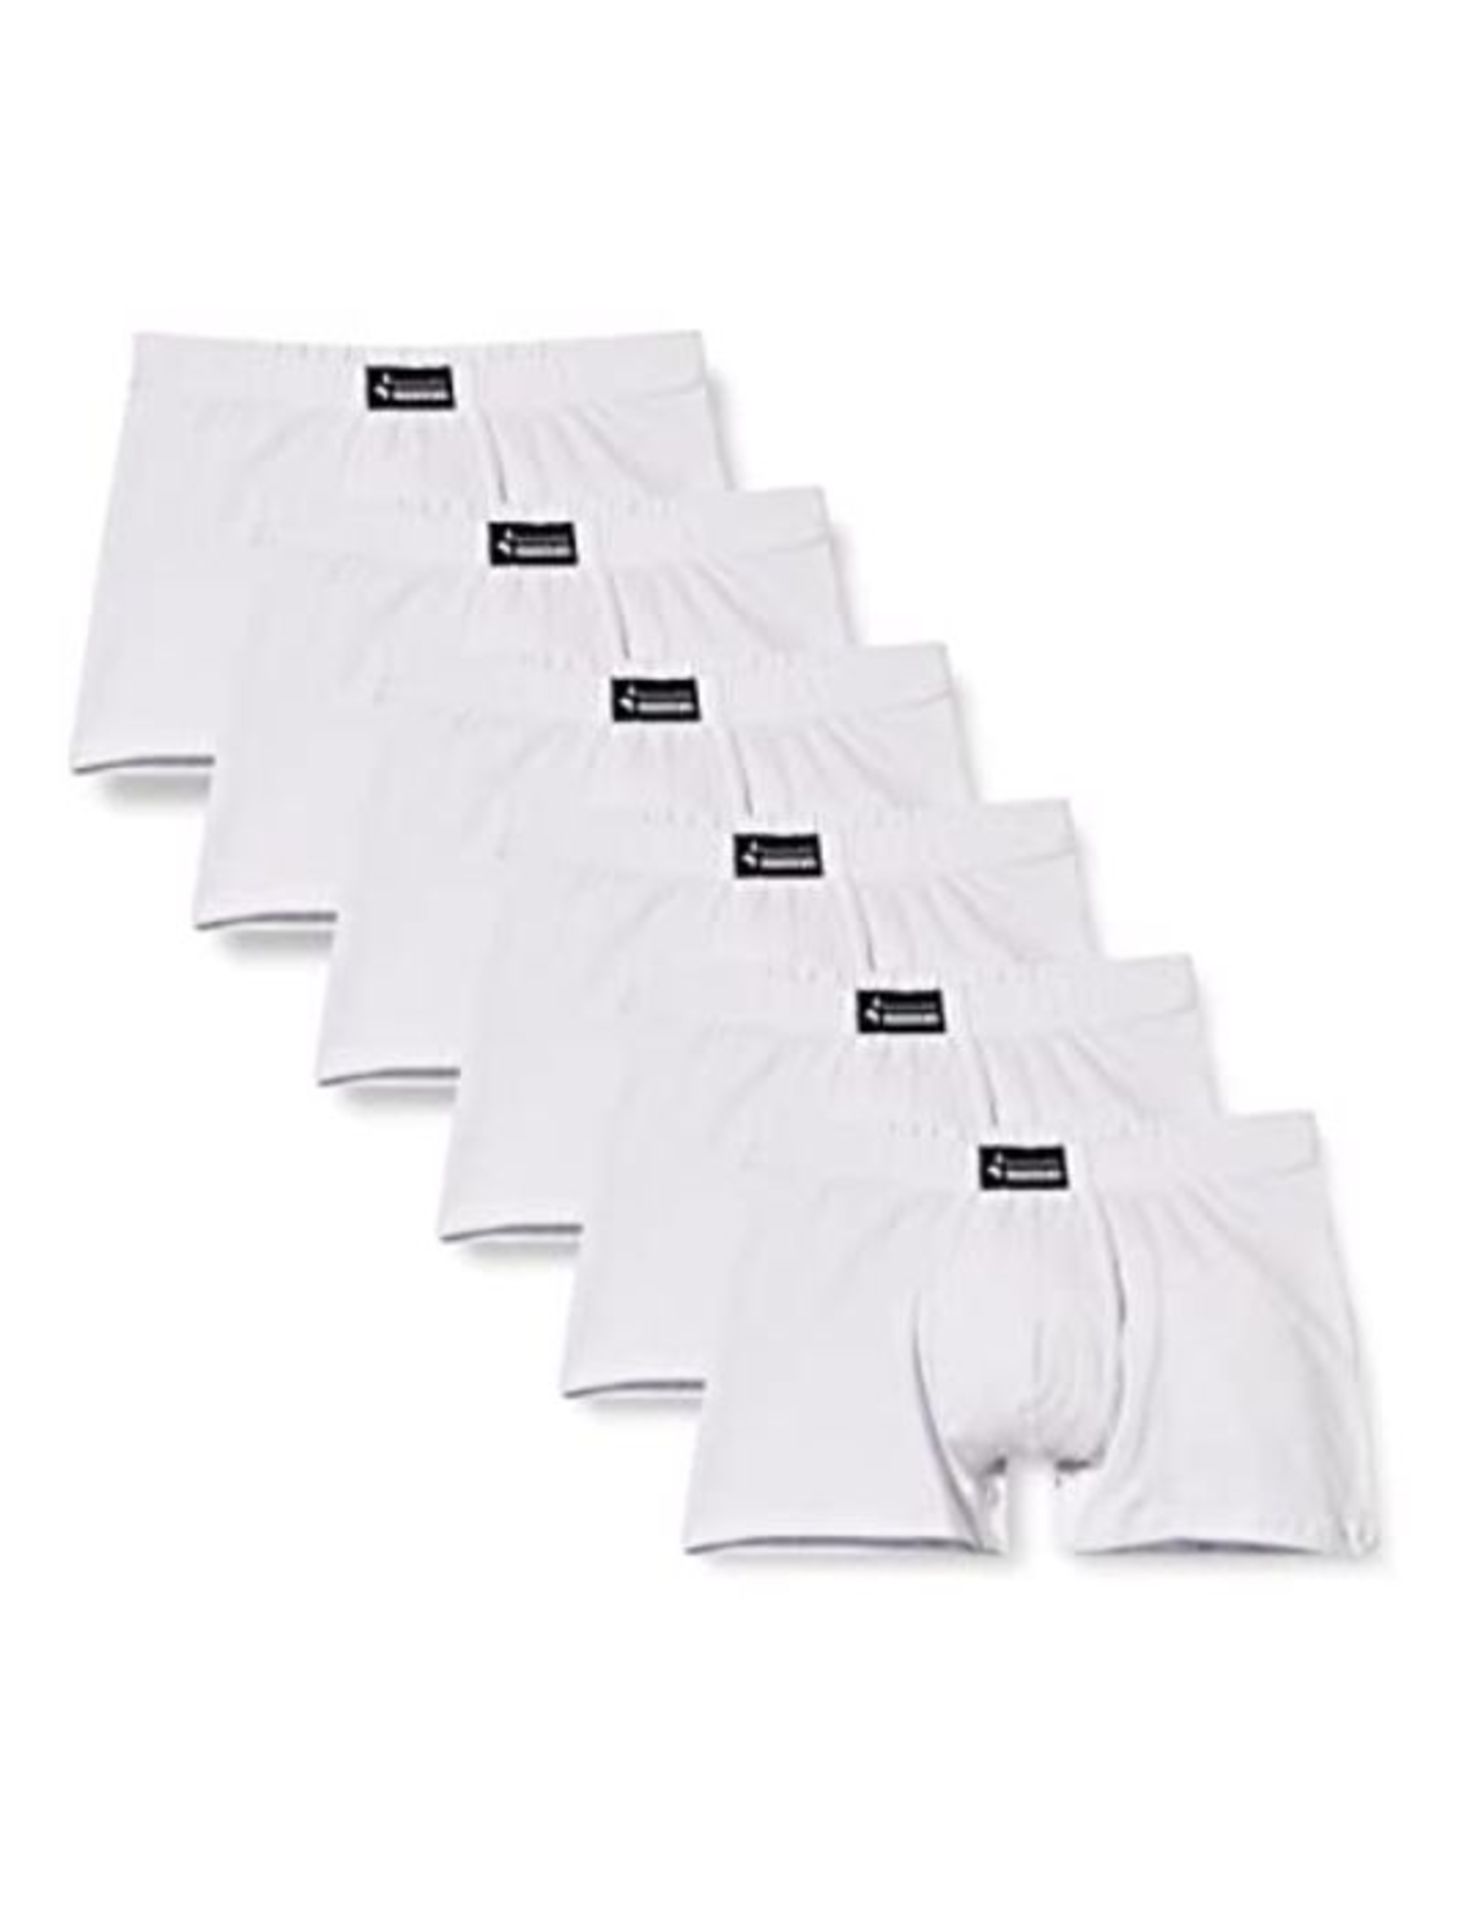 Navigare Men's 573 Boxer Briefs (Pack of 6), White, XX-Large